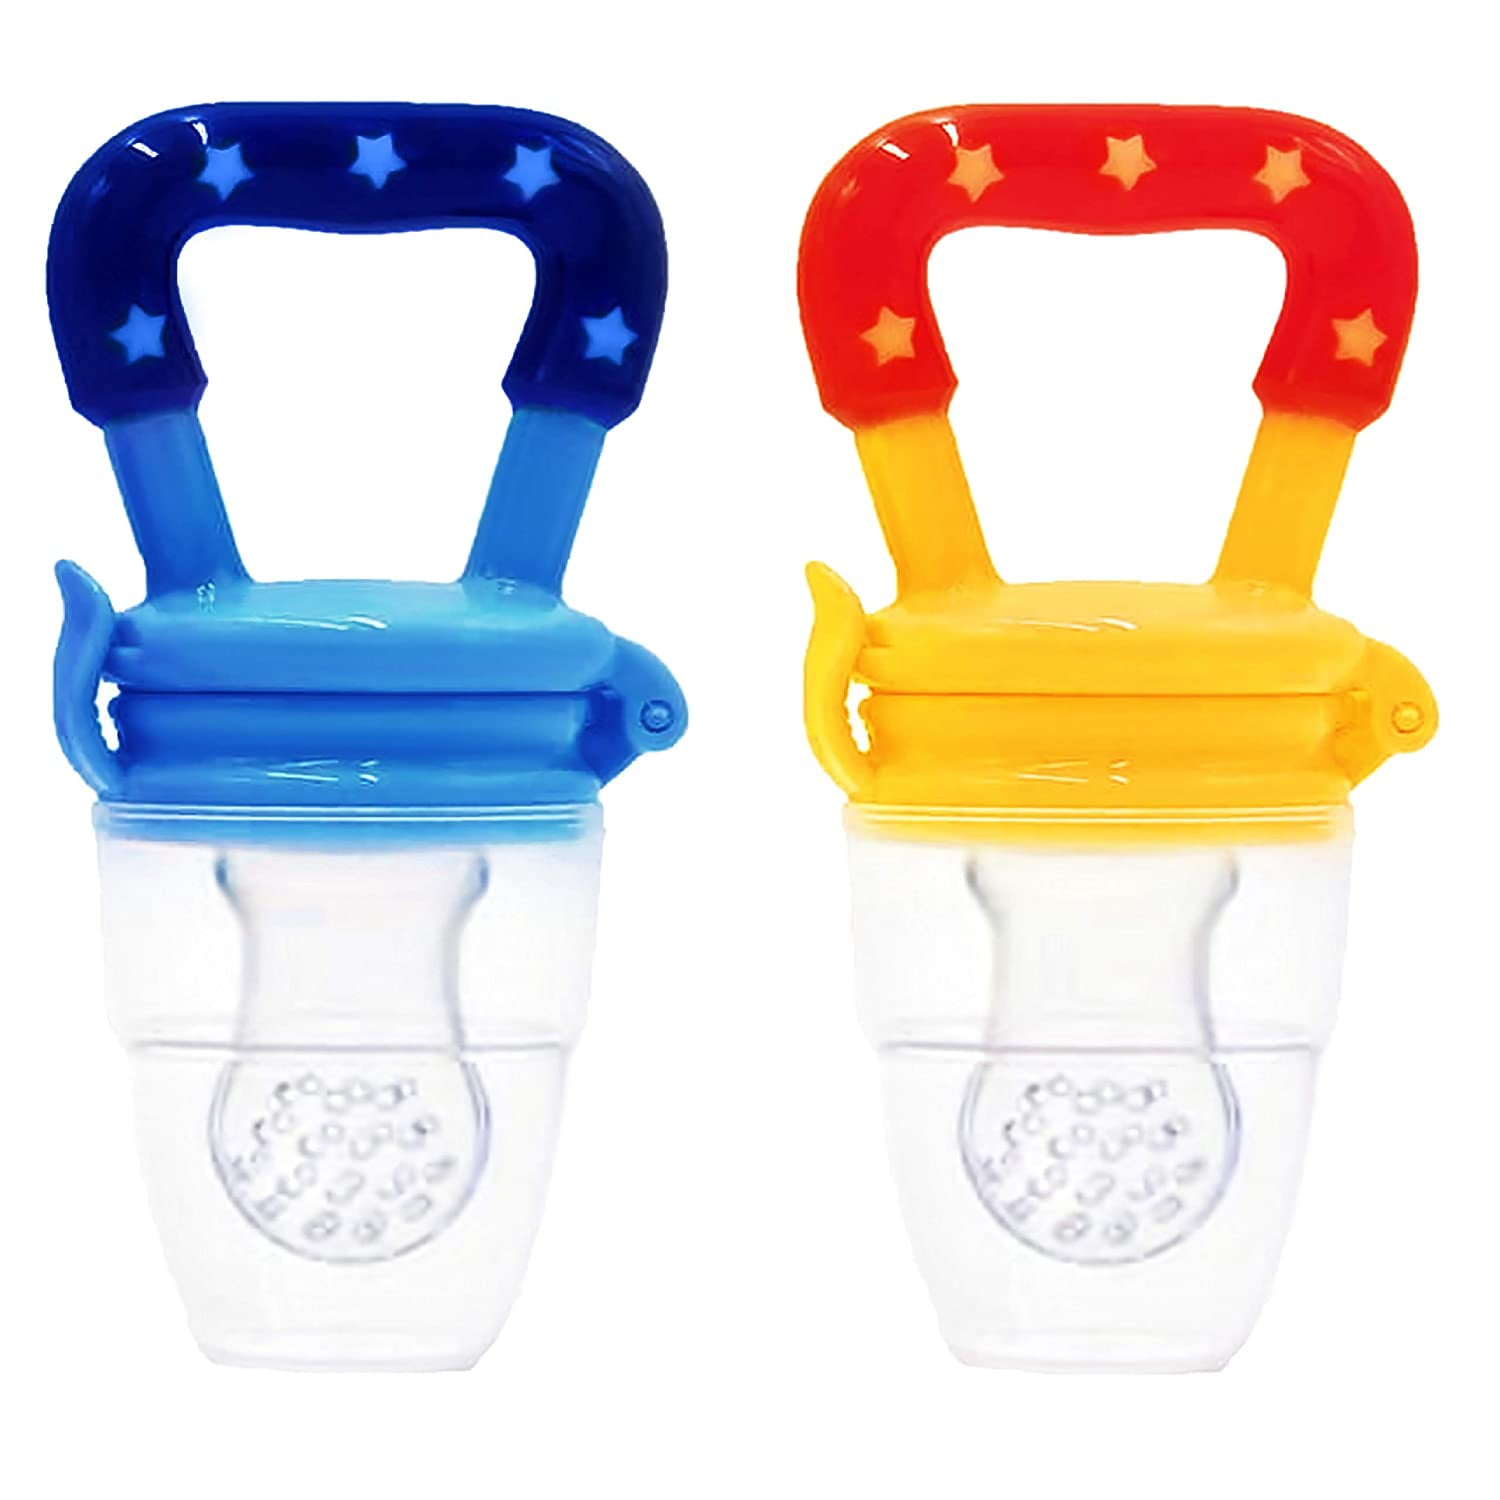 4Pack Baby Fresh Food-Silicone Nipple Feeder Pacifier-.FREE SAME DAY SHIPPING! 